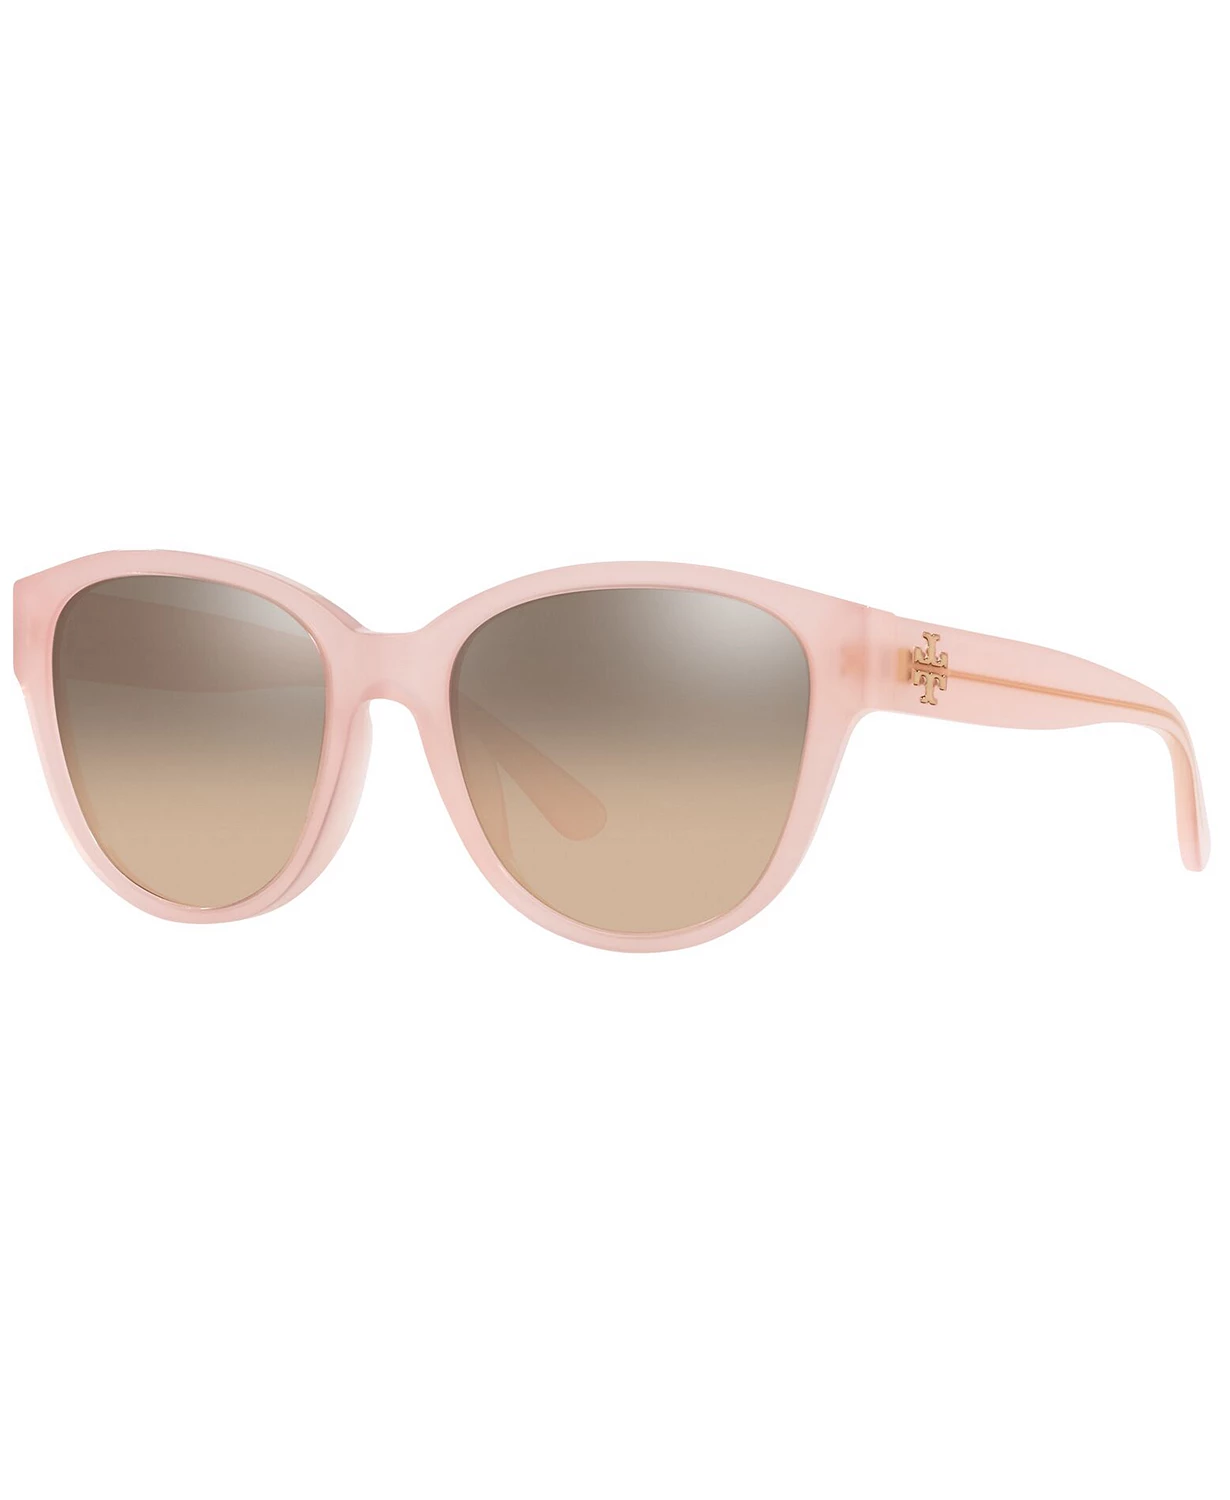 Tory Burch Blush Pink with Brown Silver Mirror Gradient